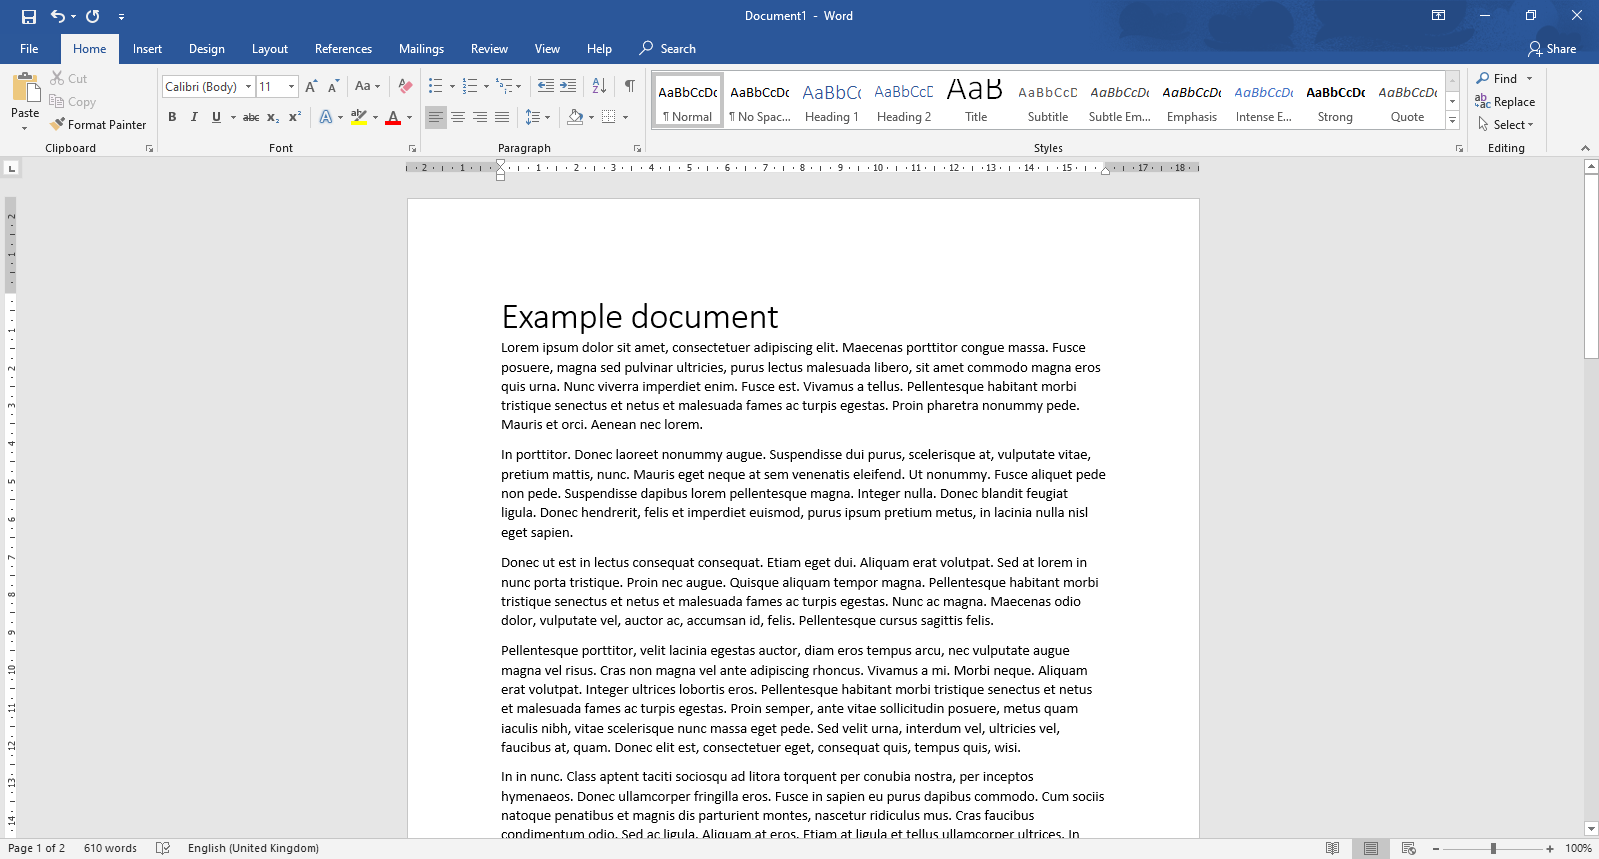 How to save a word document